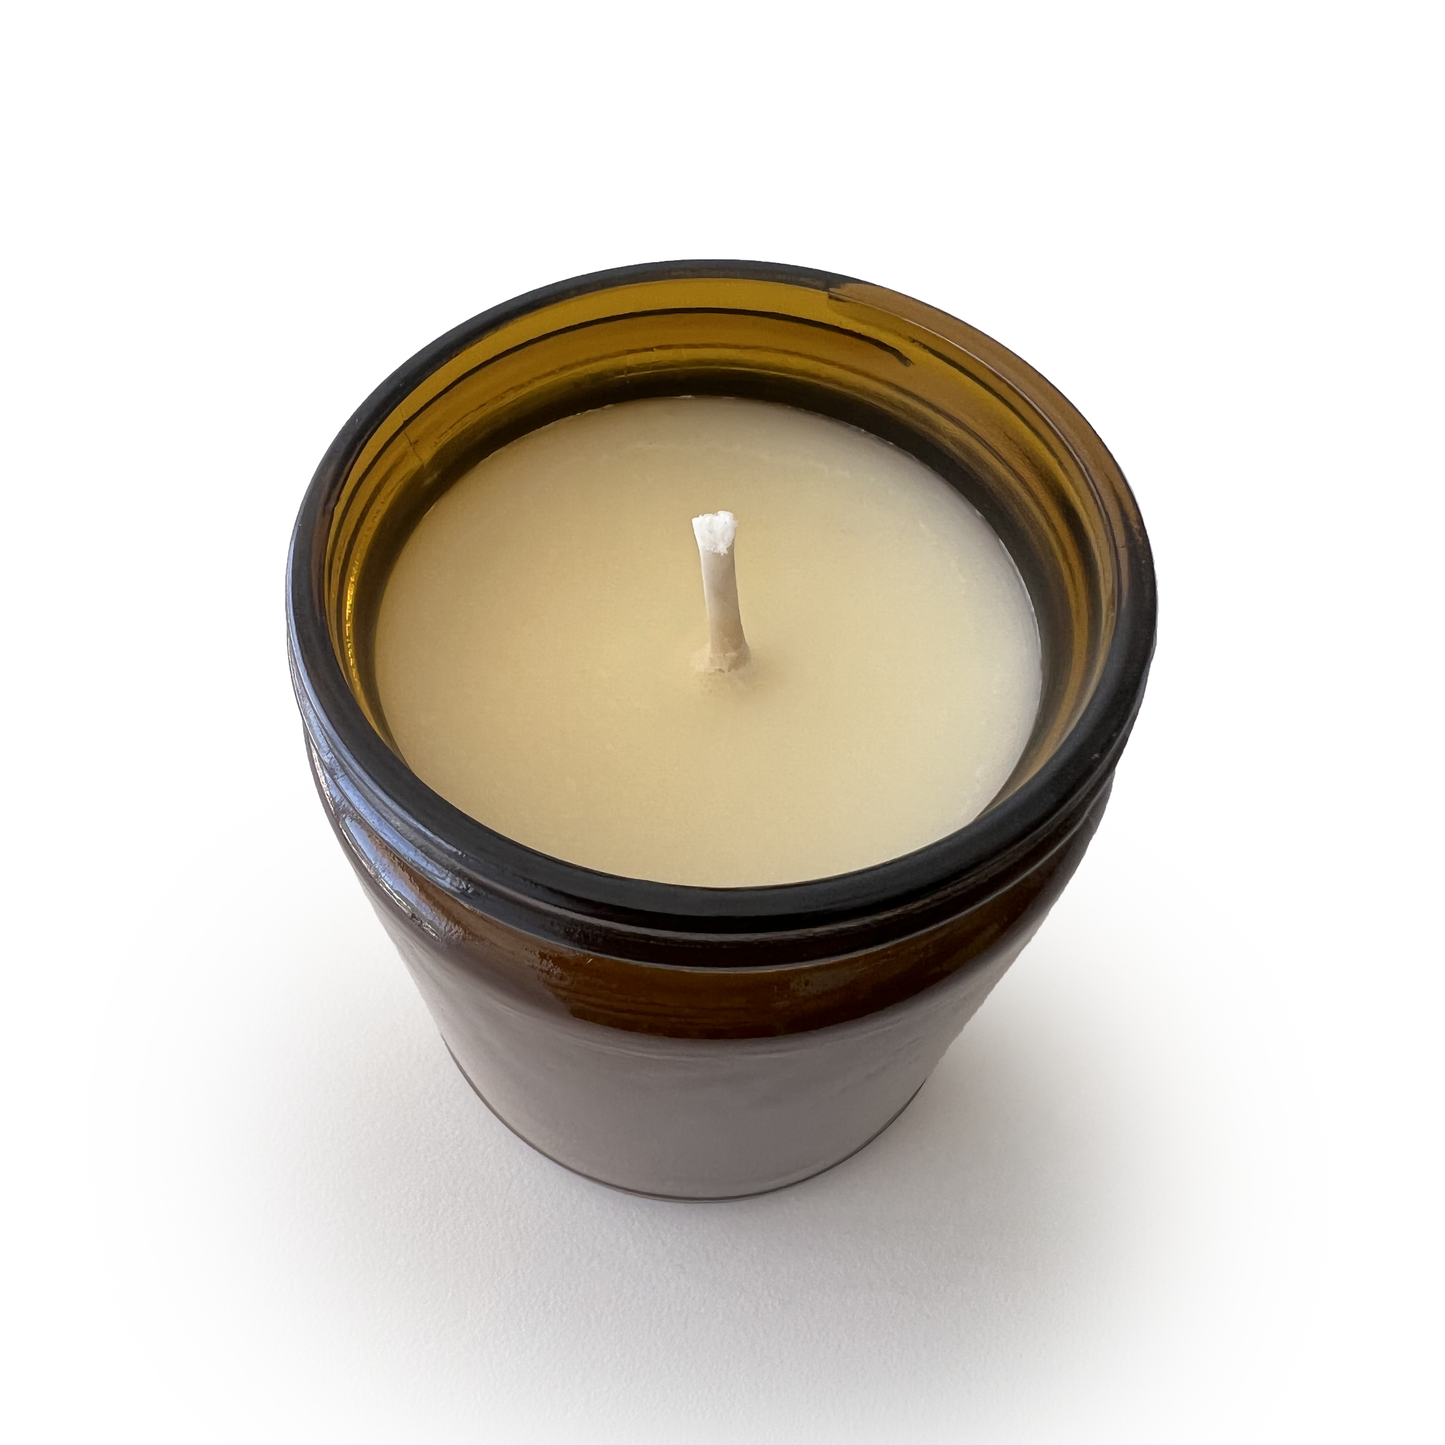 You're a Wizard - Soy Candle 9oz